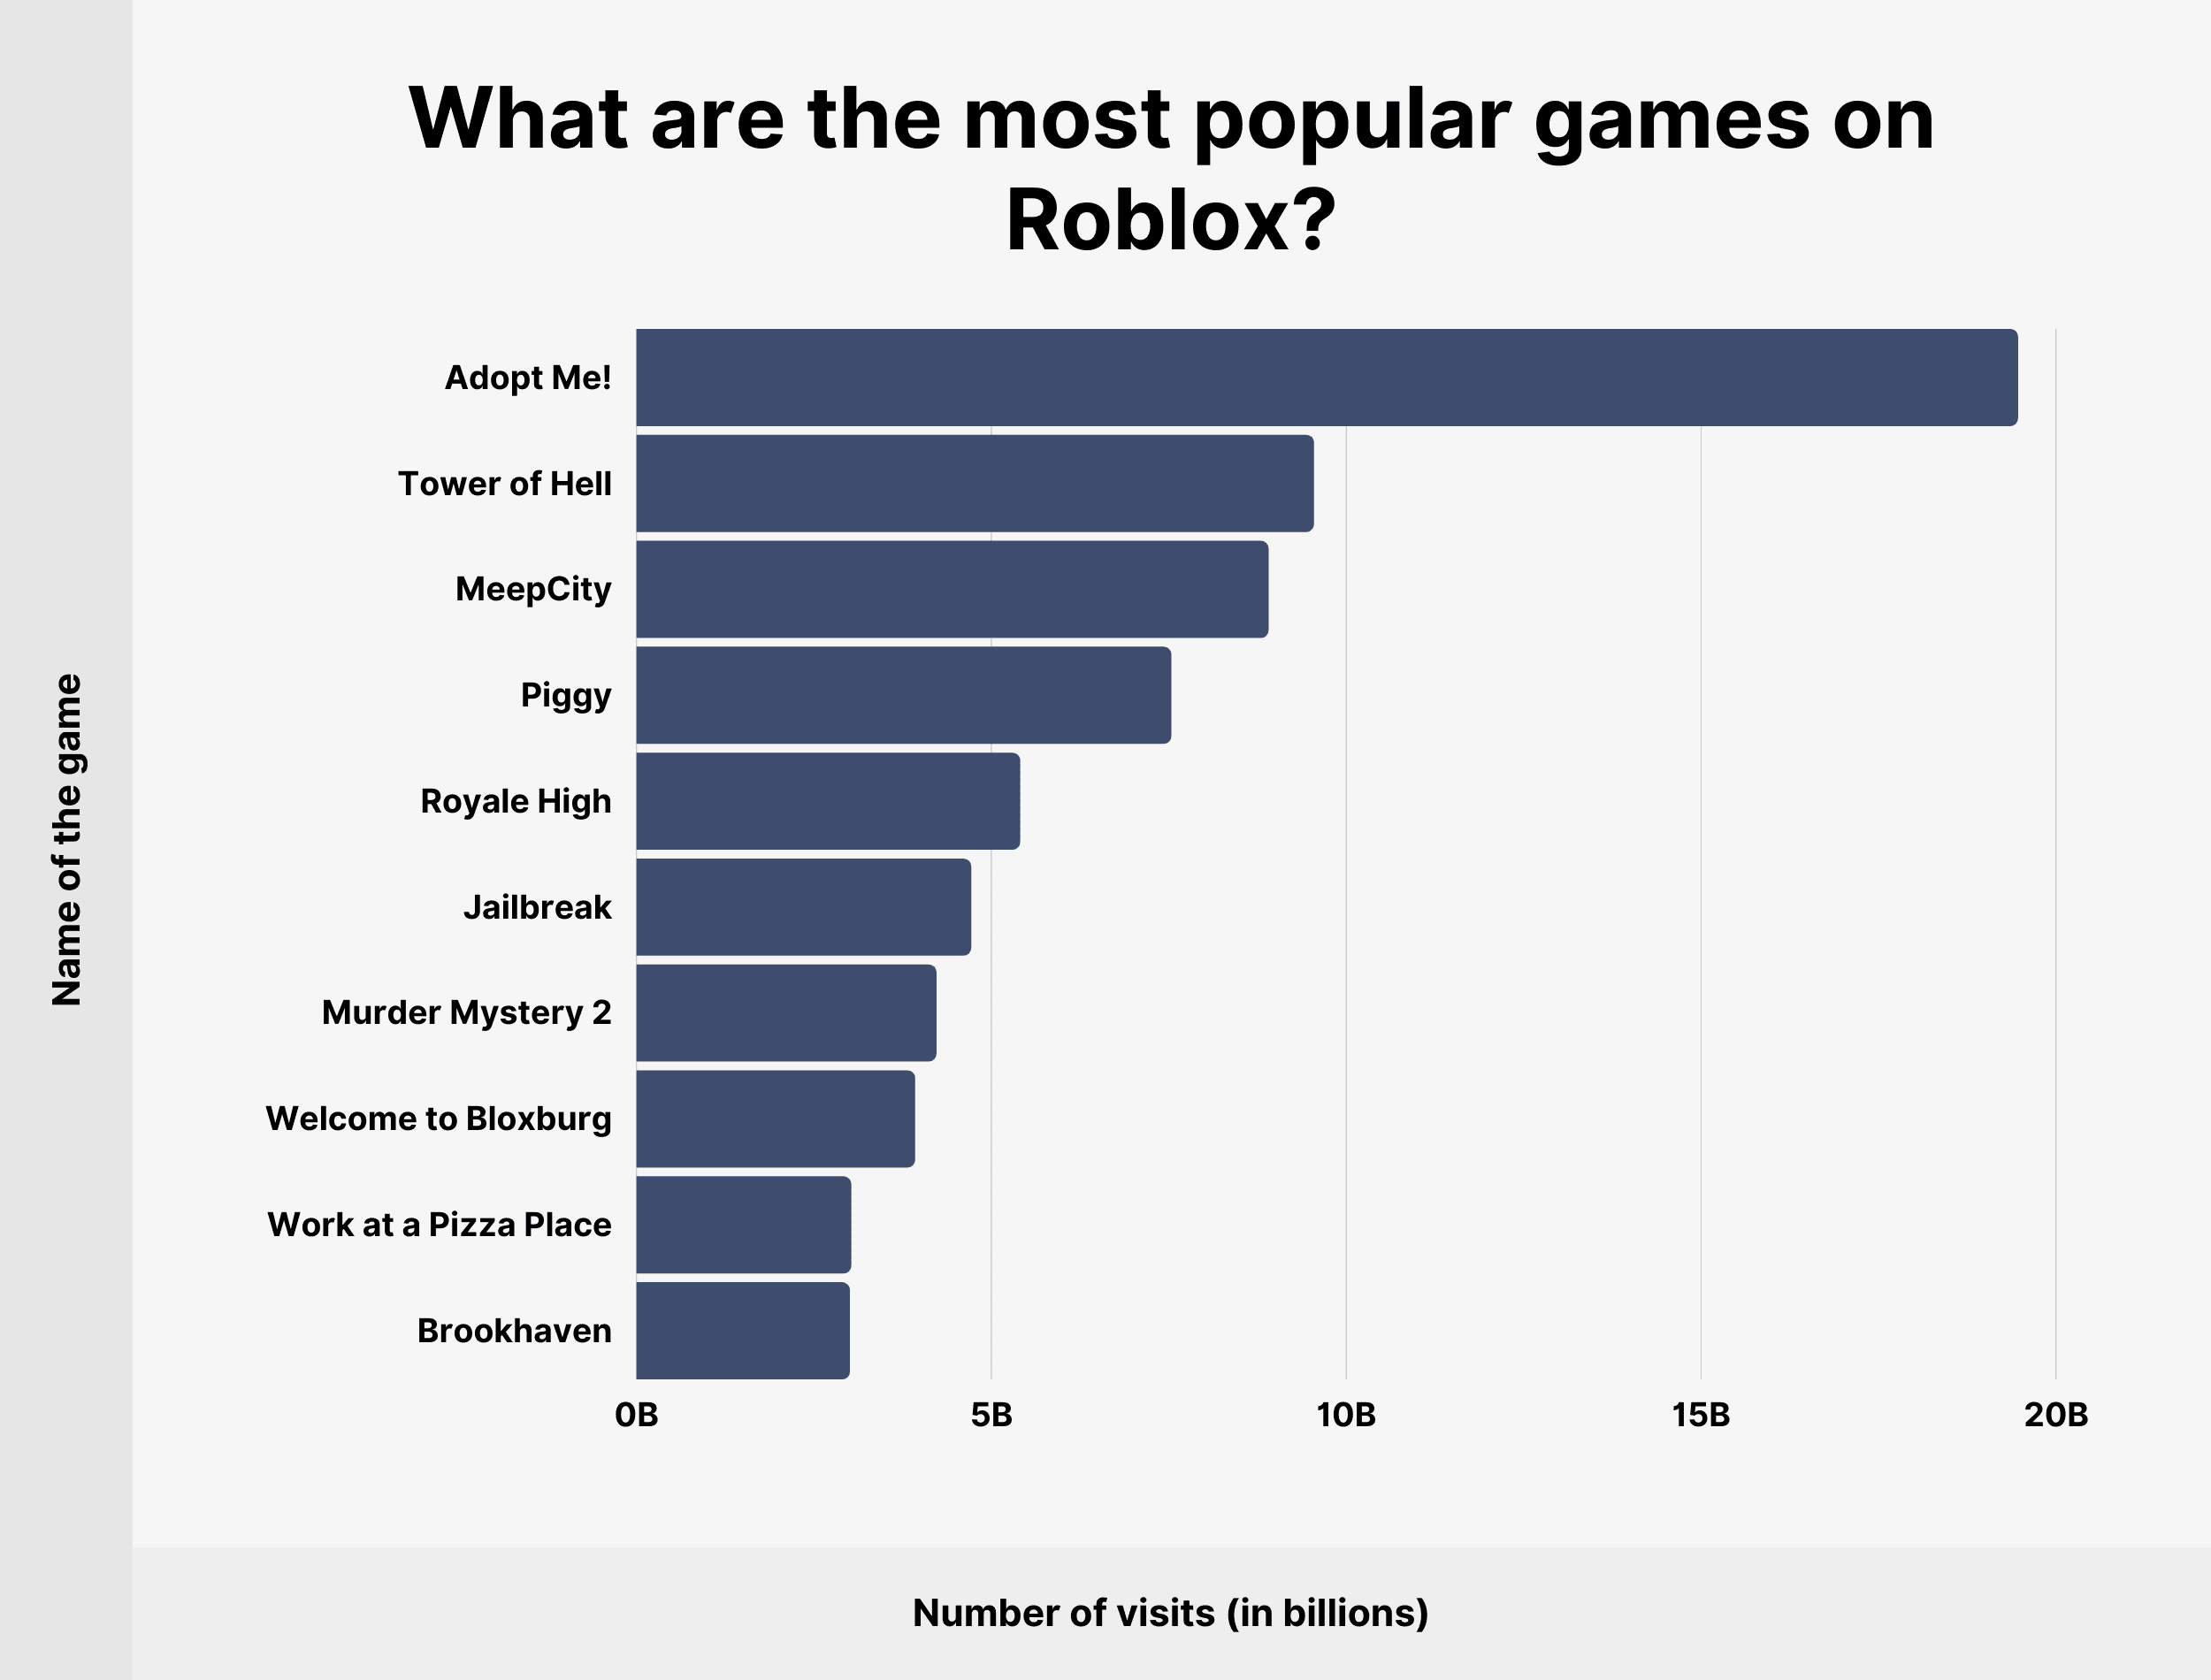 What are the most popular games on Roblox?